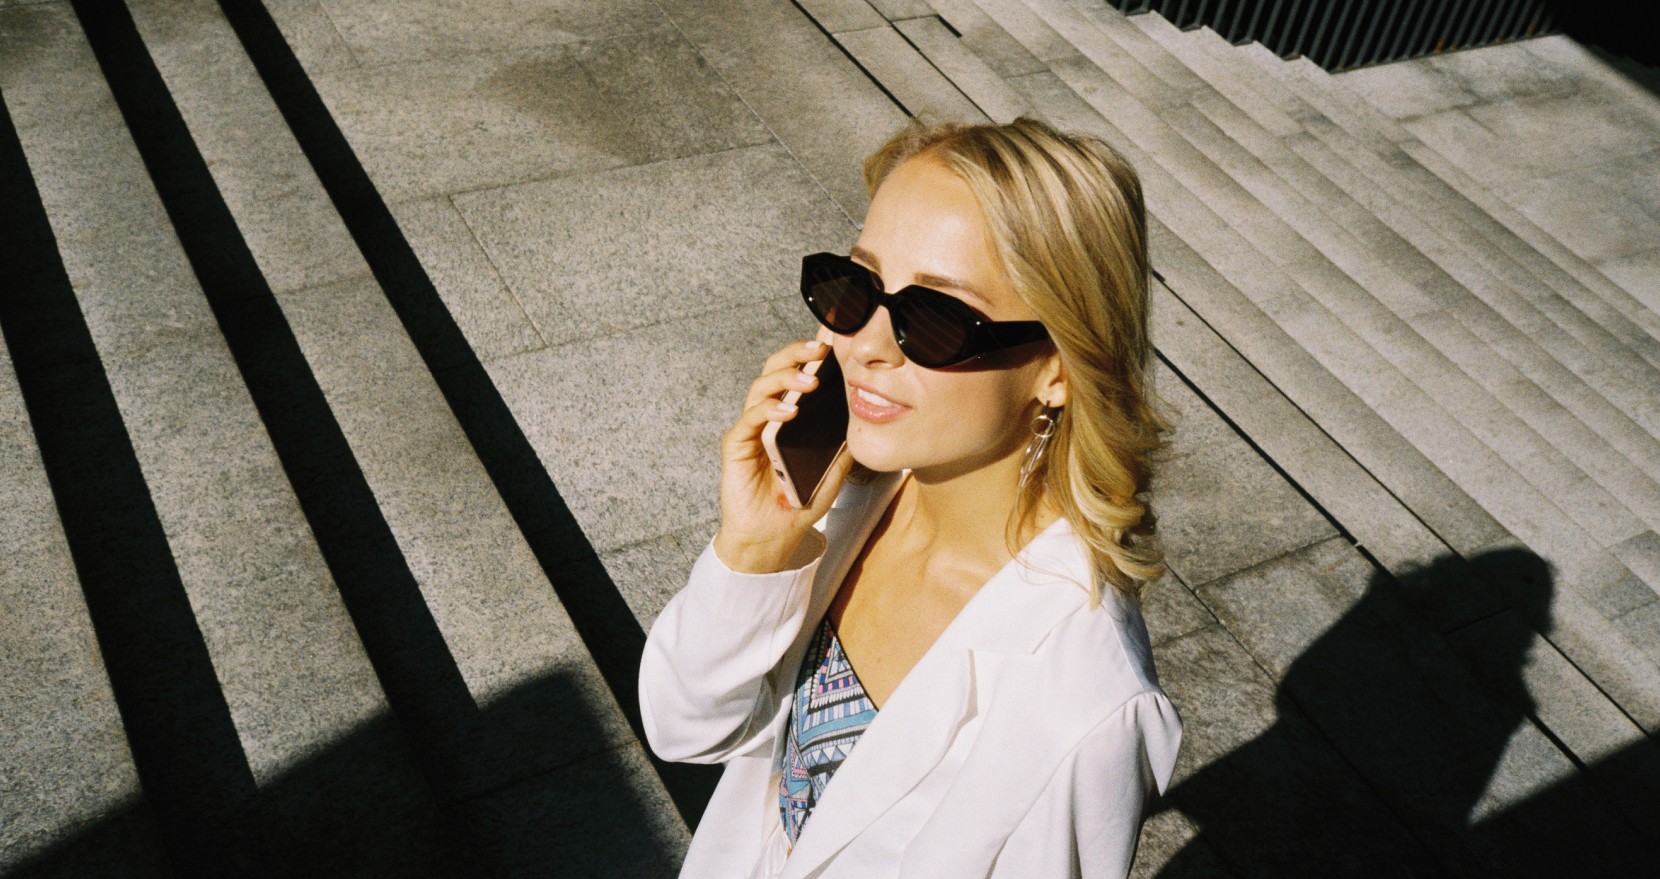 Stylish young woman on the phone, wearing sunglasses